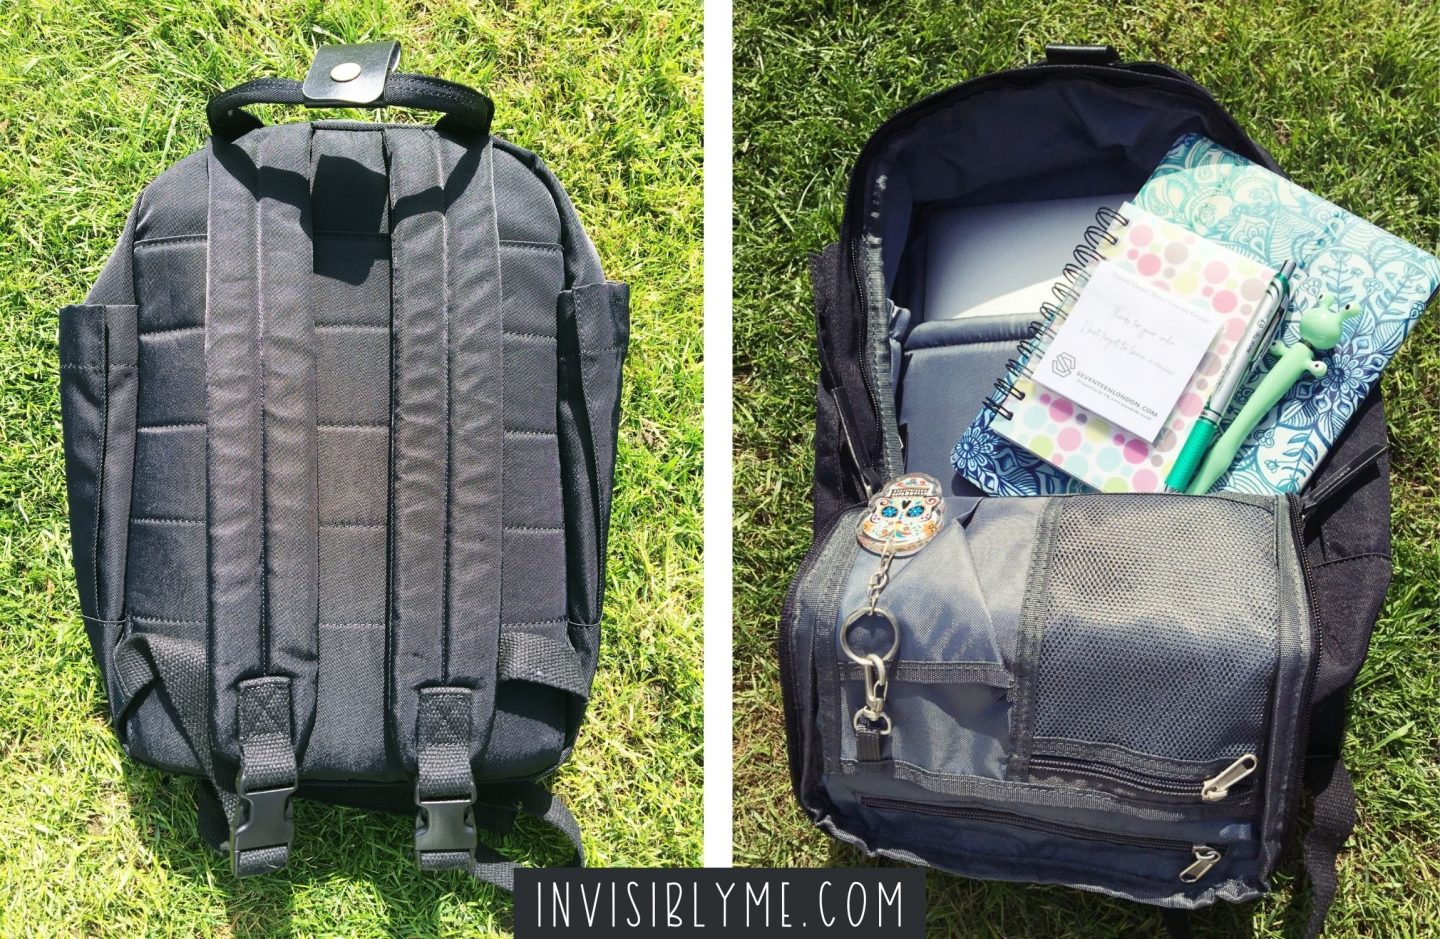 A photo collage of two photos side by side showing the Seventeen London backpack in my review. On the left, the back is on the grass showing the back of the bag with the straps. On the right, the bag is again on the grass but unzipped, with a laptop, notebooks and pens inside.